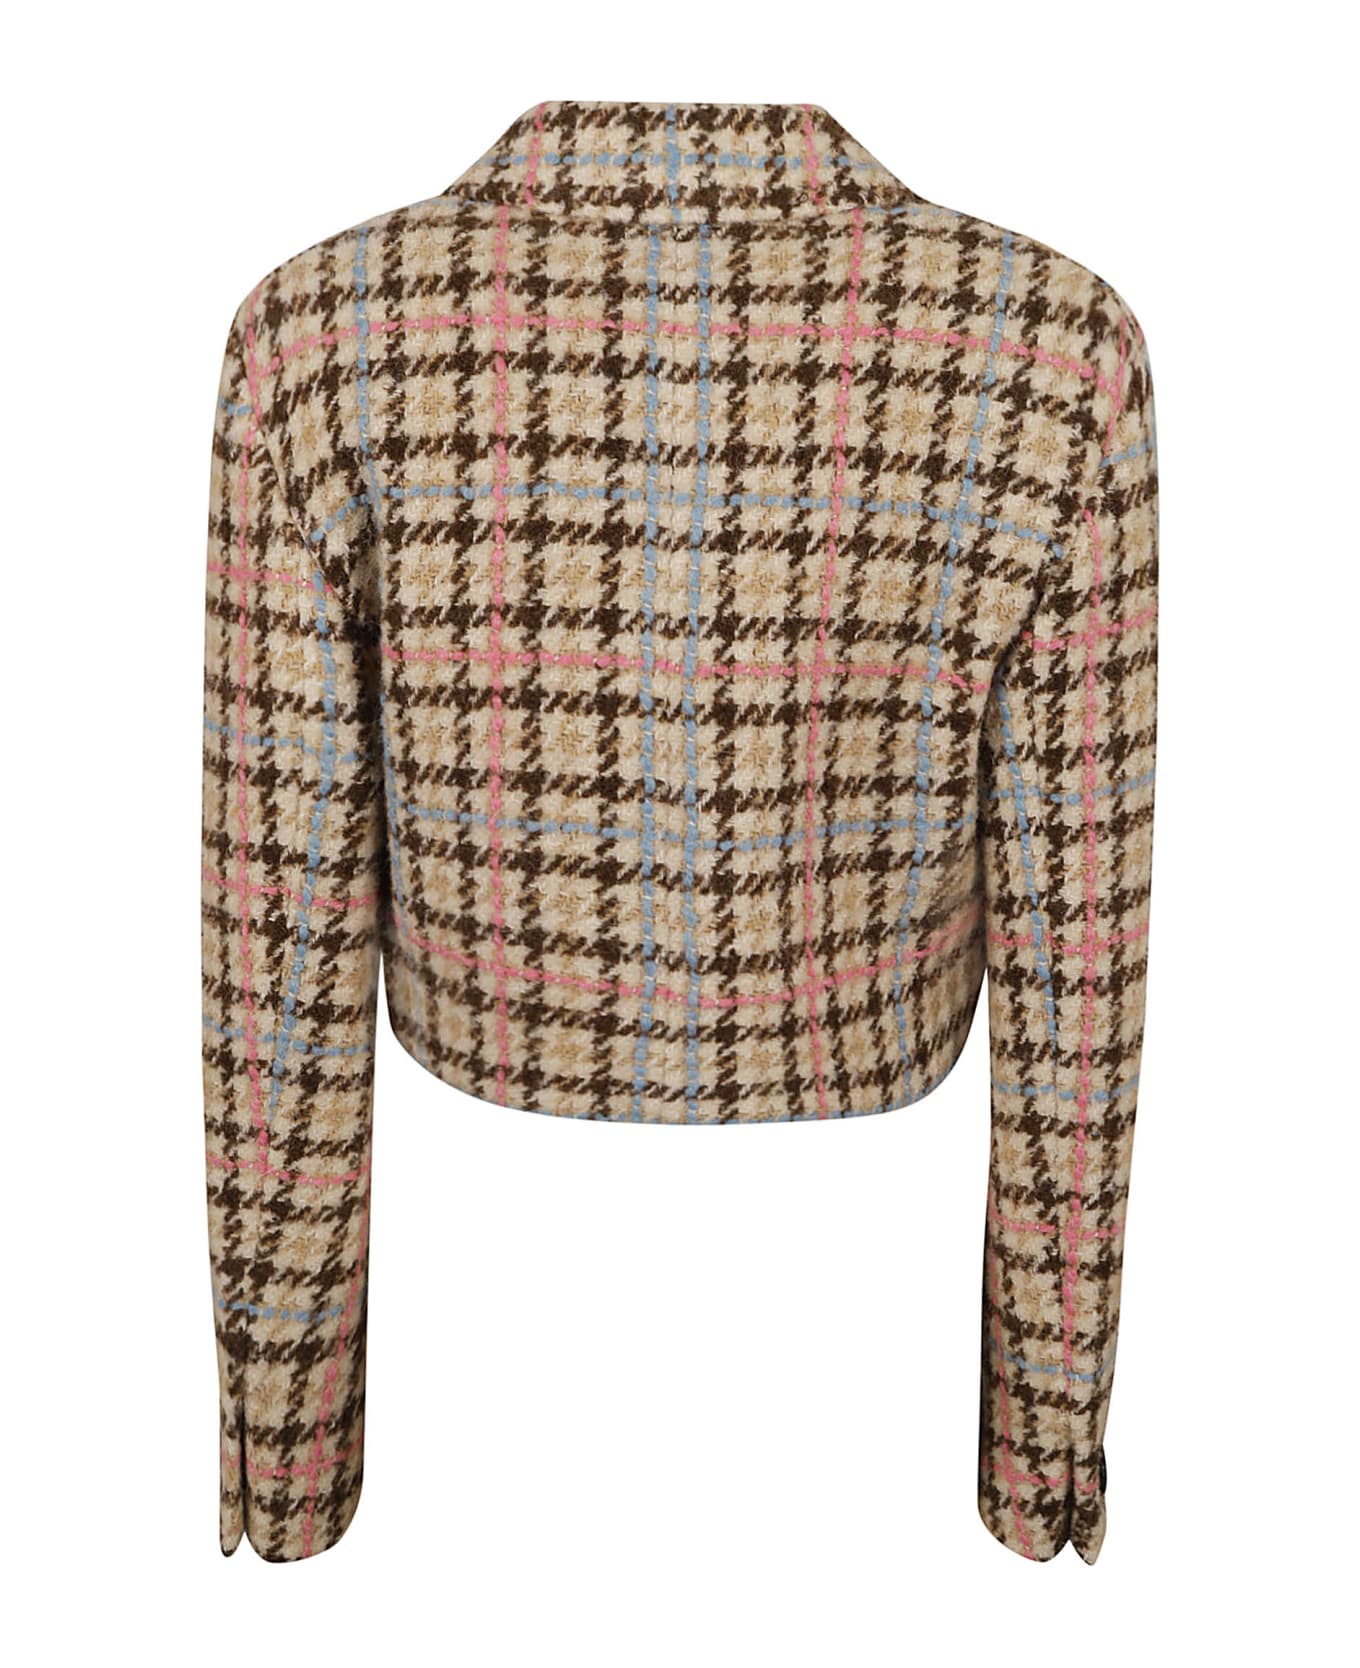 MSGM Houndstooth Cropped Check Jacket - Beige